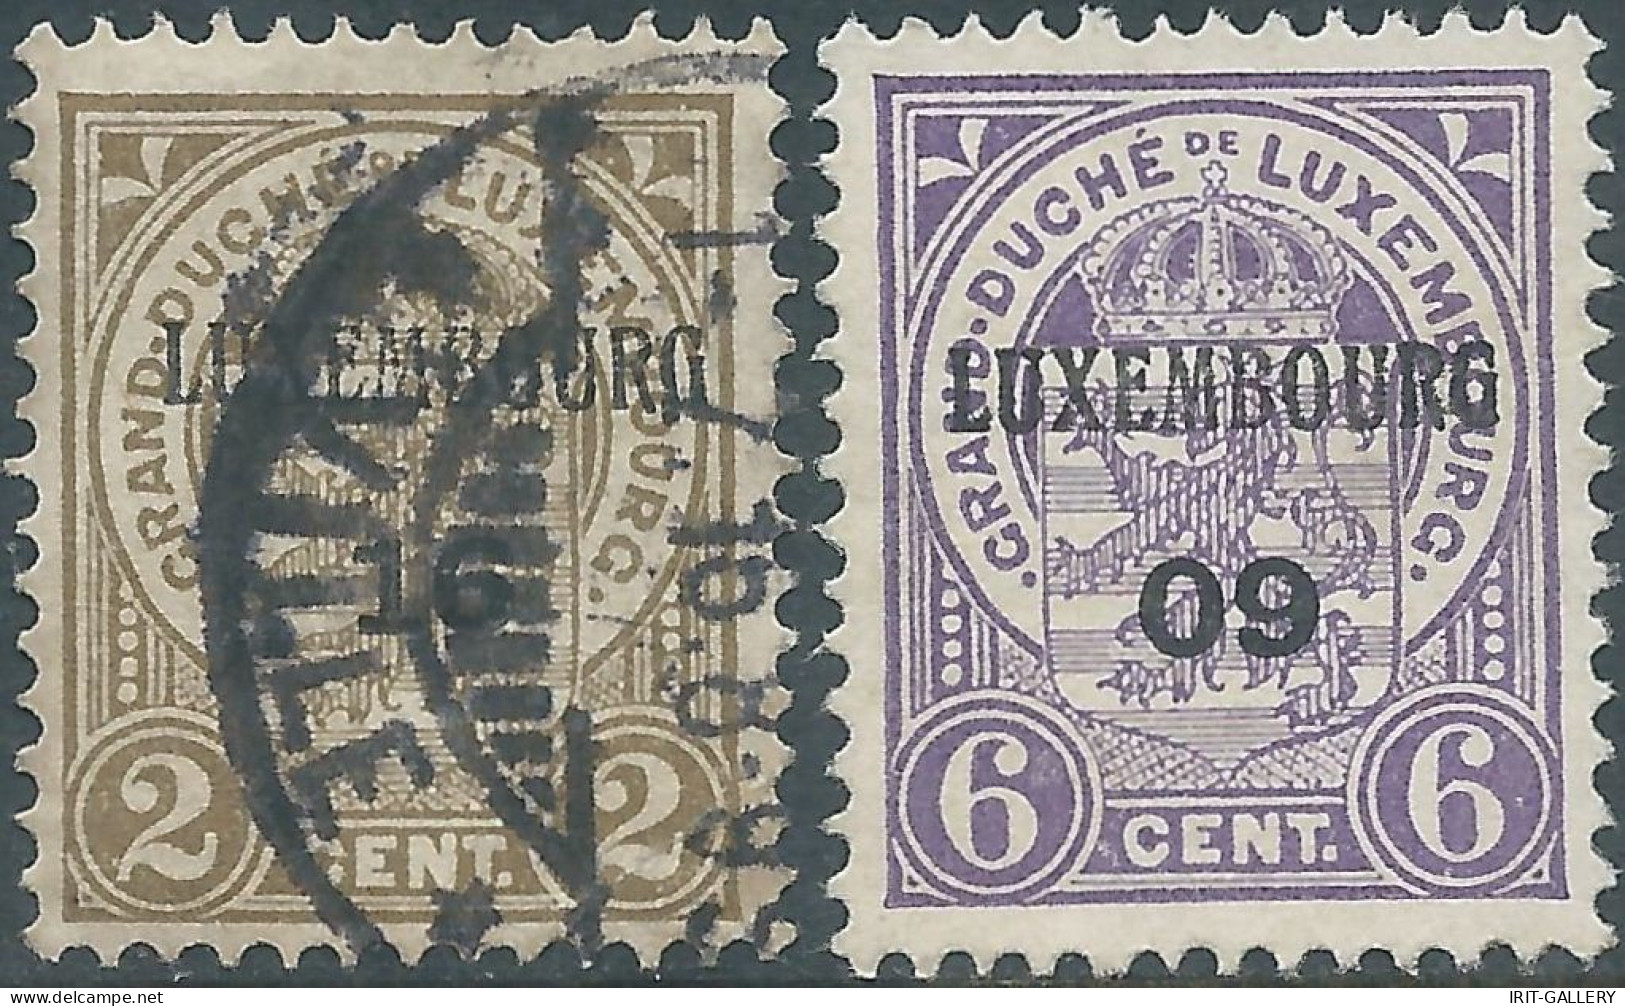 Lussemburgo - Luxembourg - 1912 Coat Of Arms,Overprinted On 2C Obliterated  & 6C Mint - 1907-24 Abzeichen